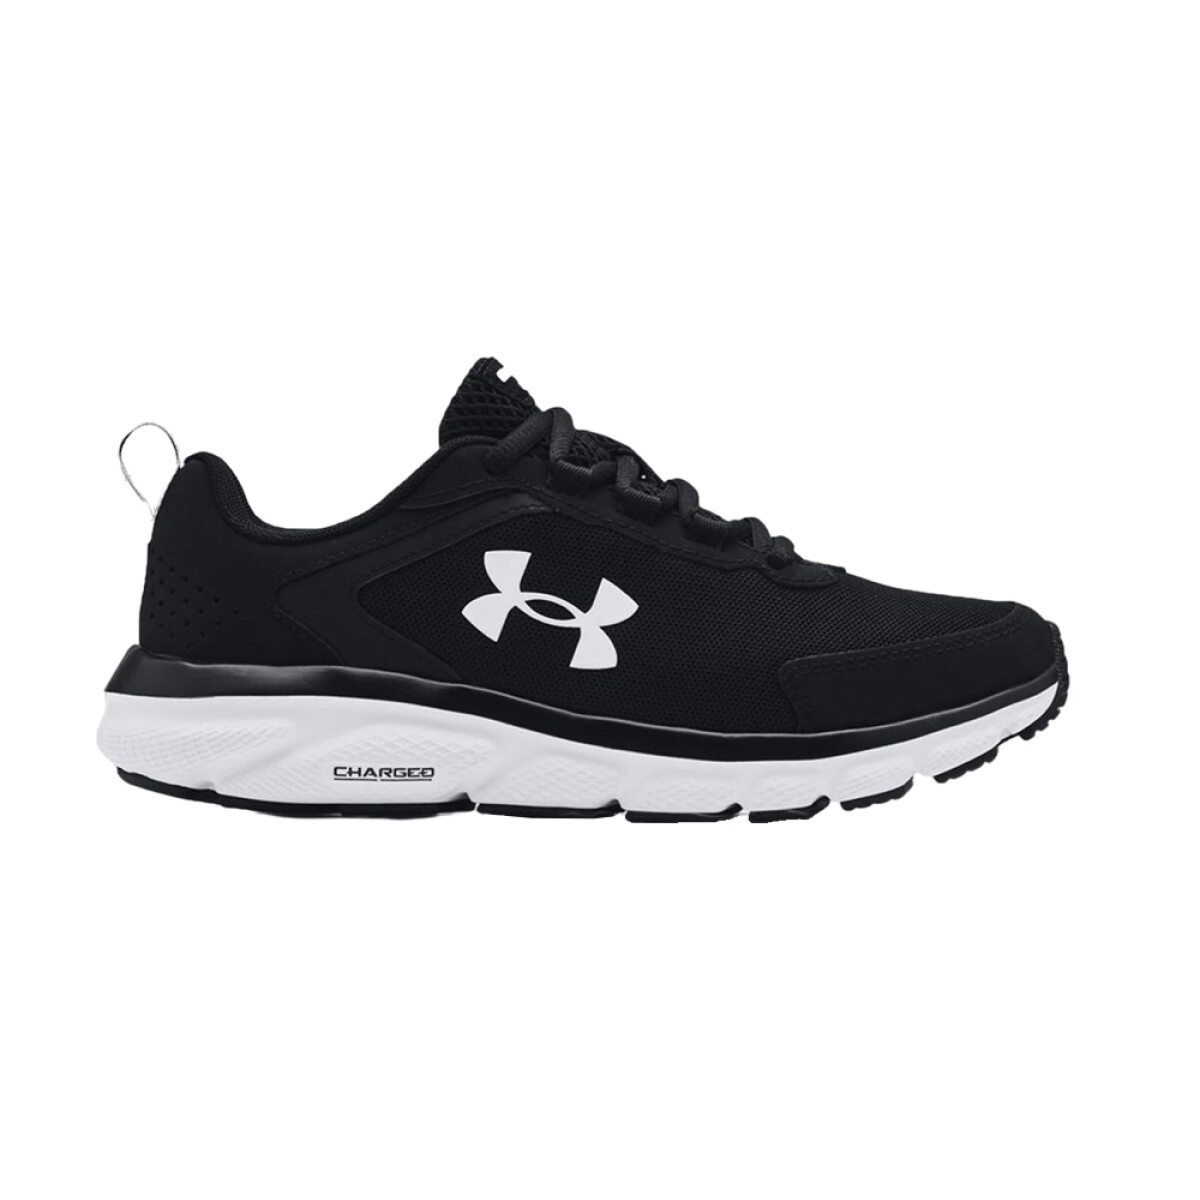 UNDER ARMOUR CHARGED ASSERT - Black 